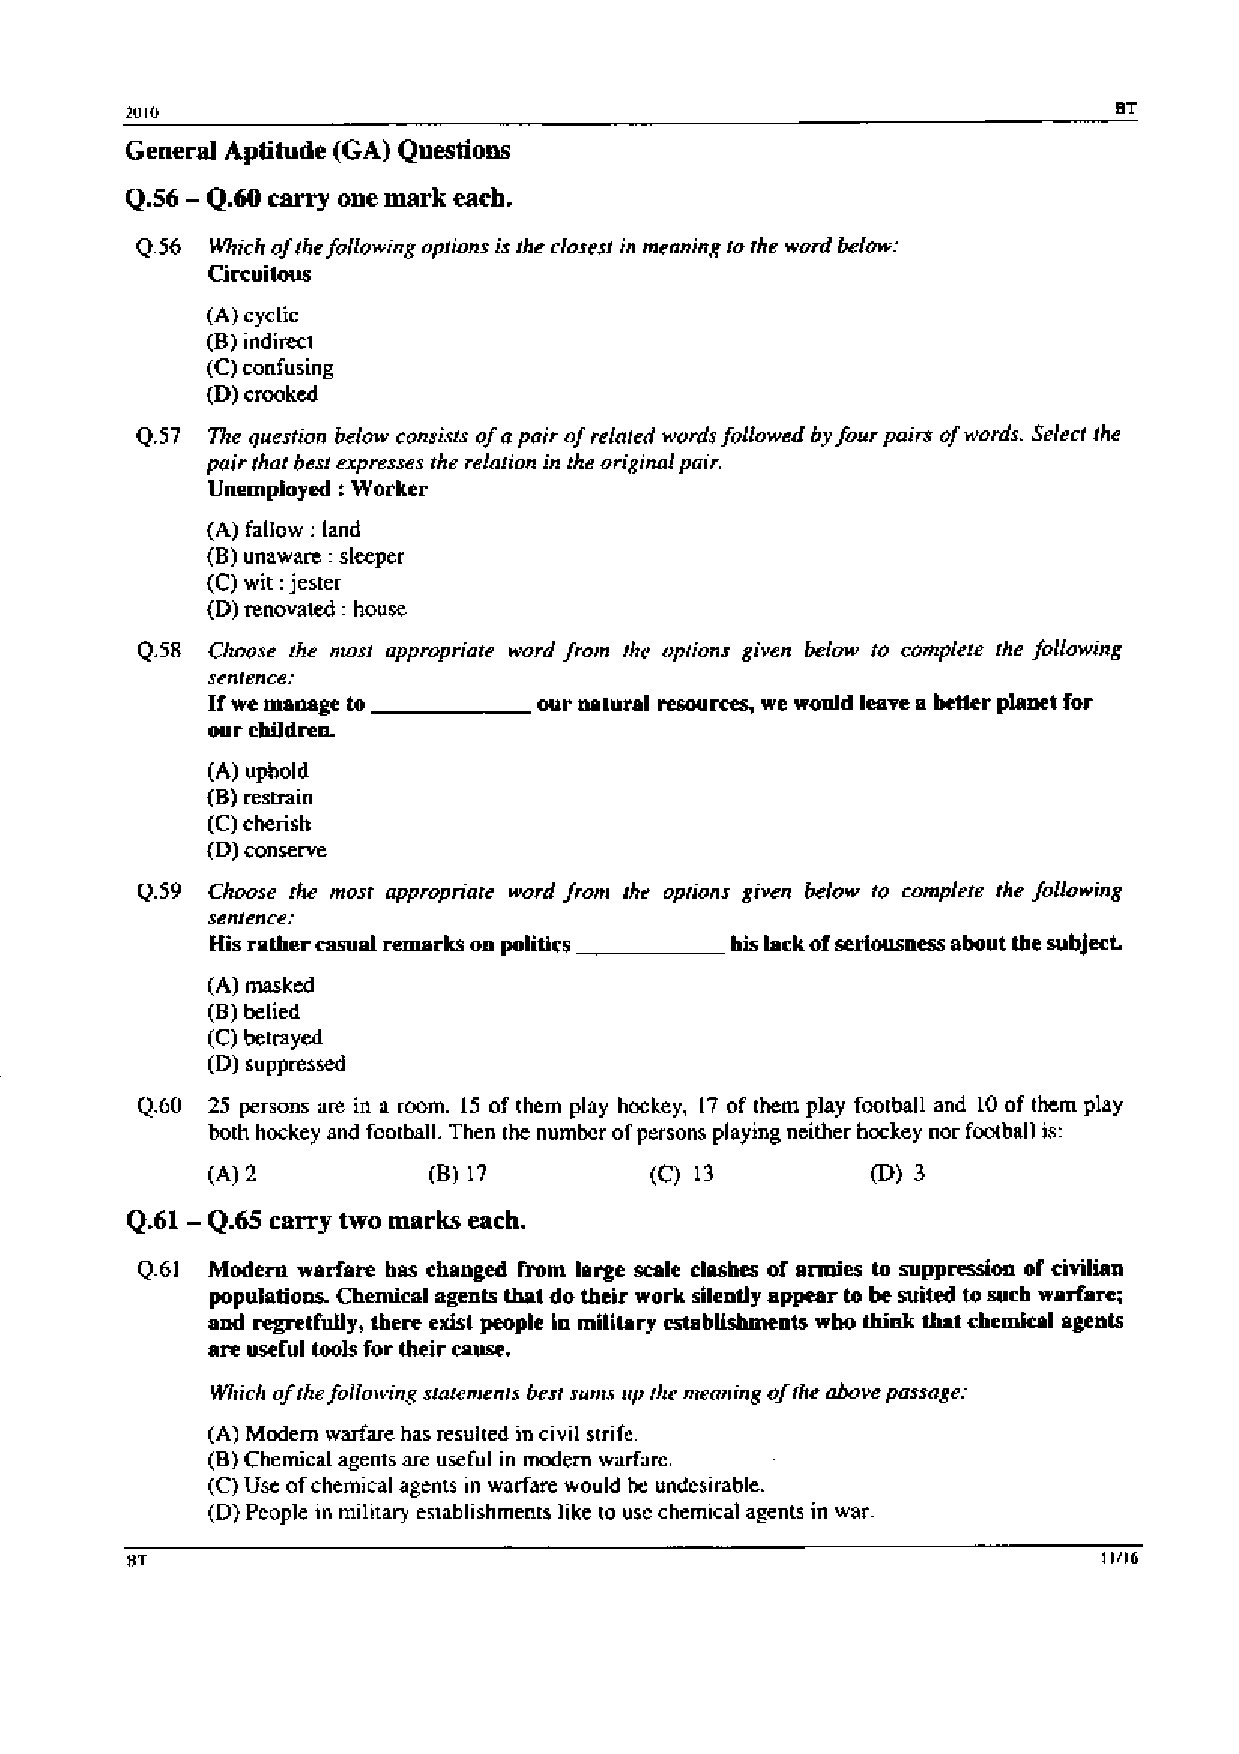 GATE Exam Question Paper 2010 Biotechnology 11